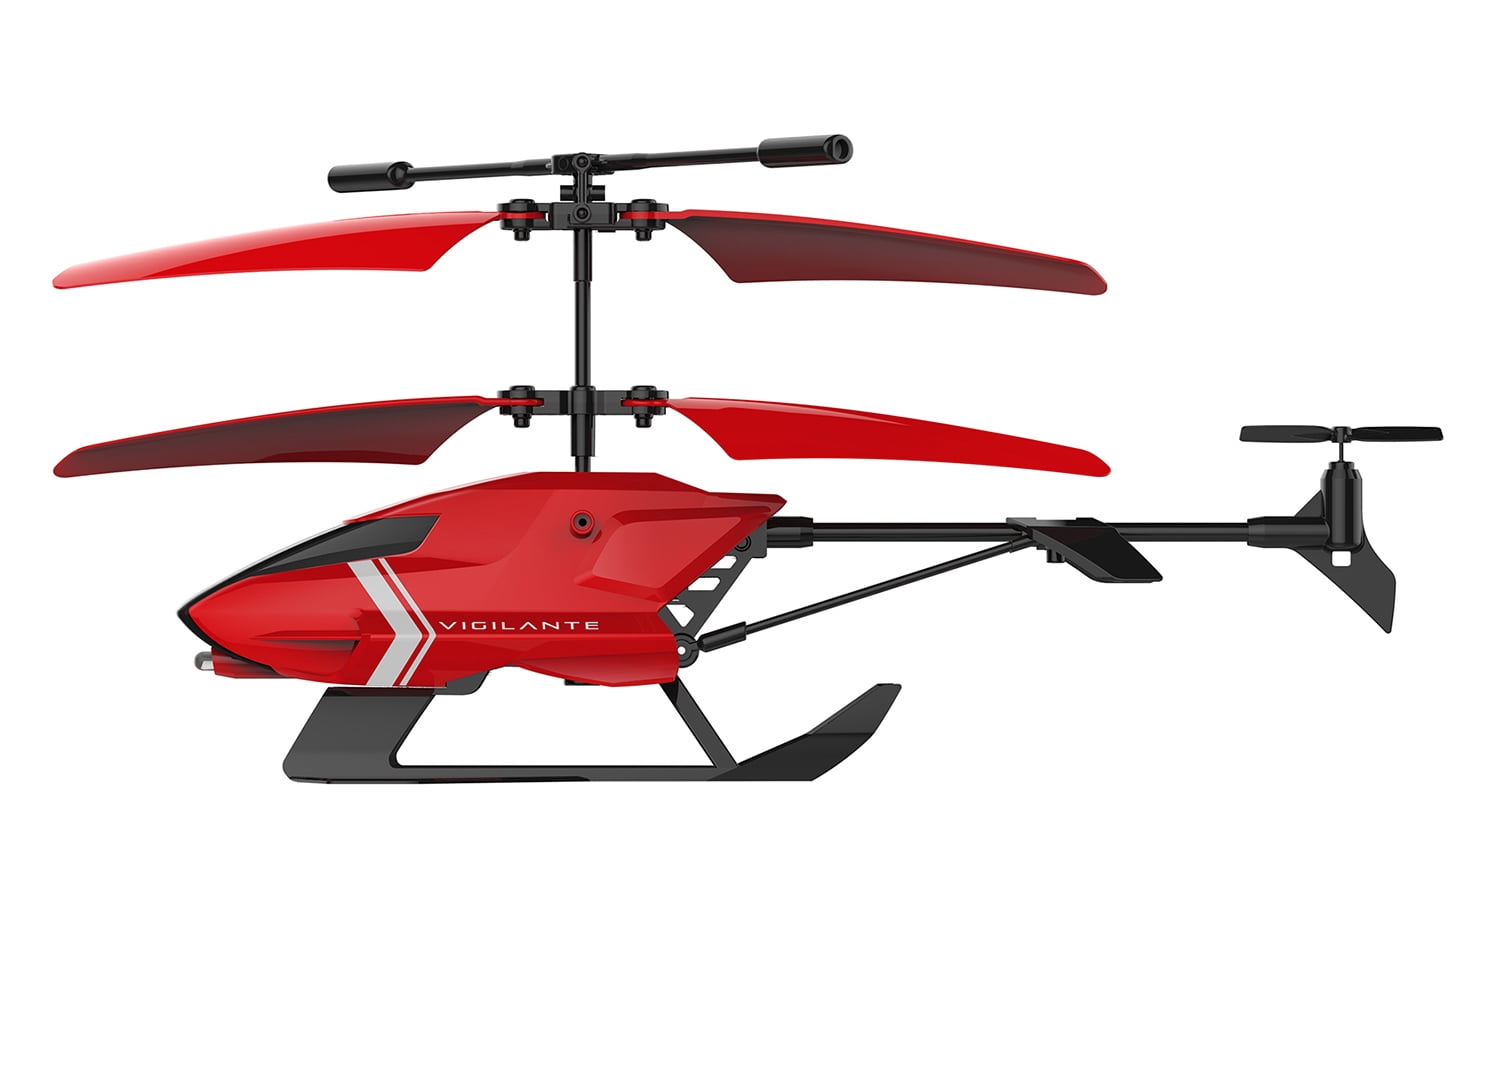 sky rover remote control helicopter